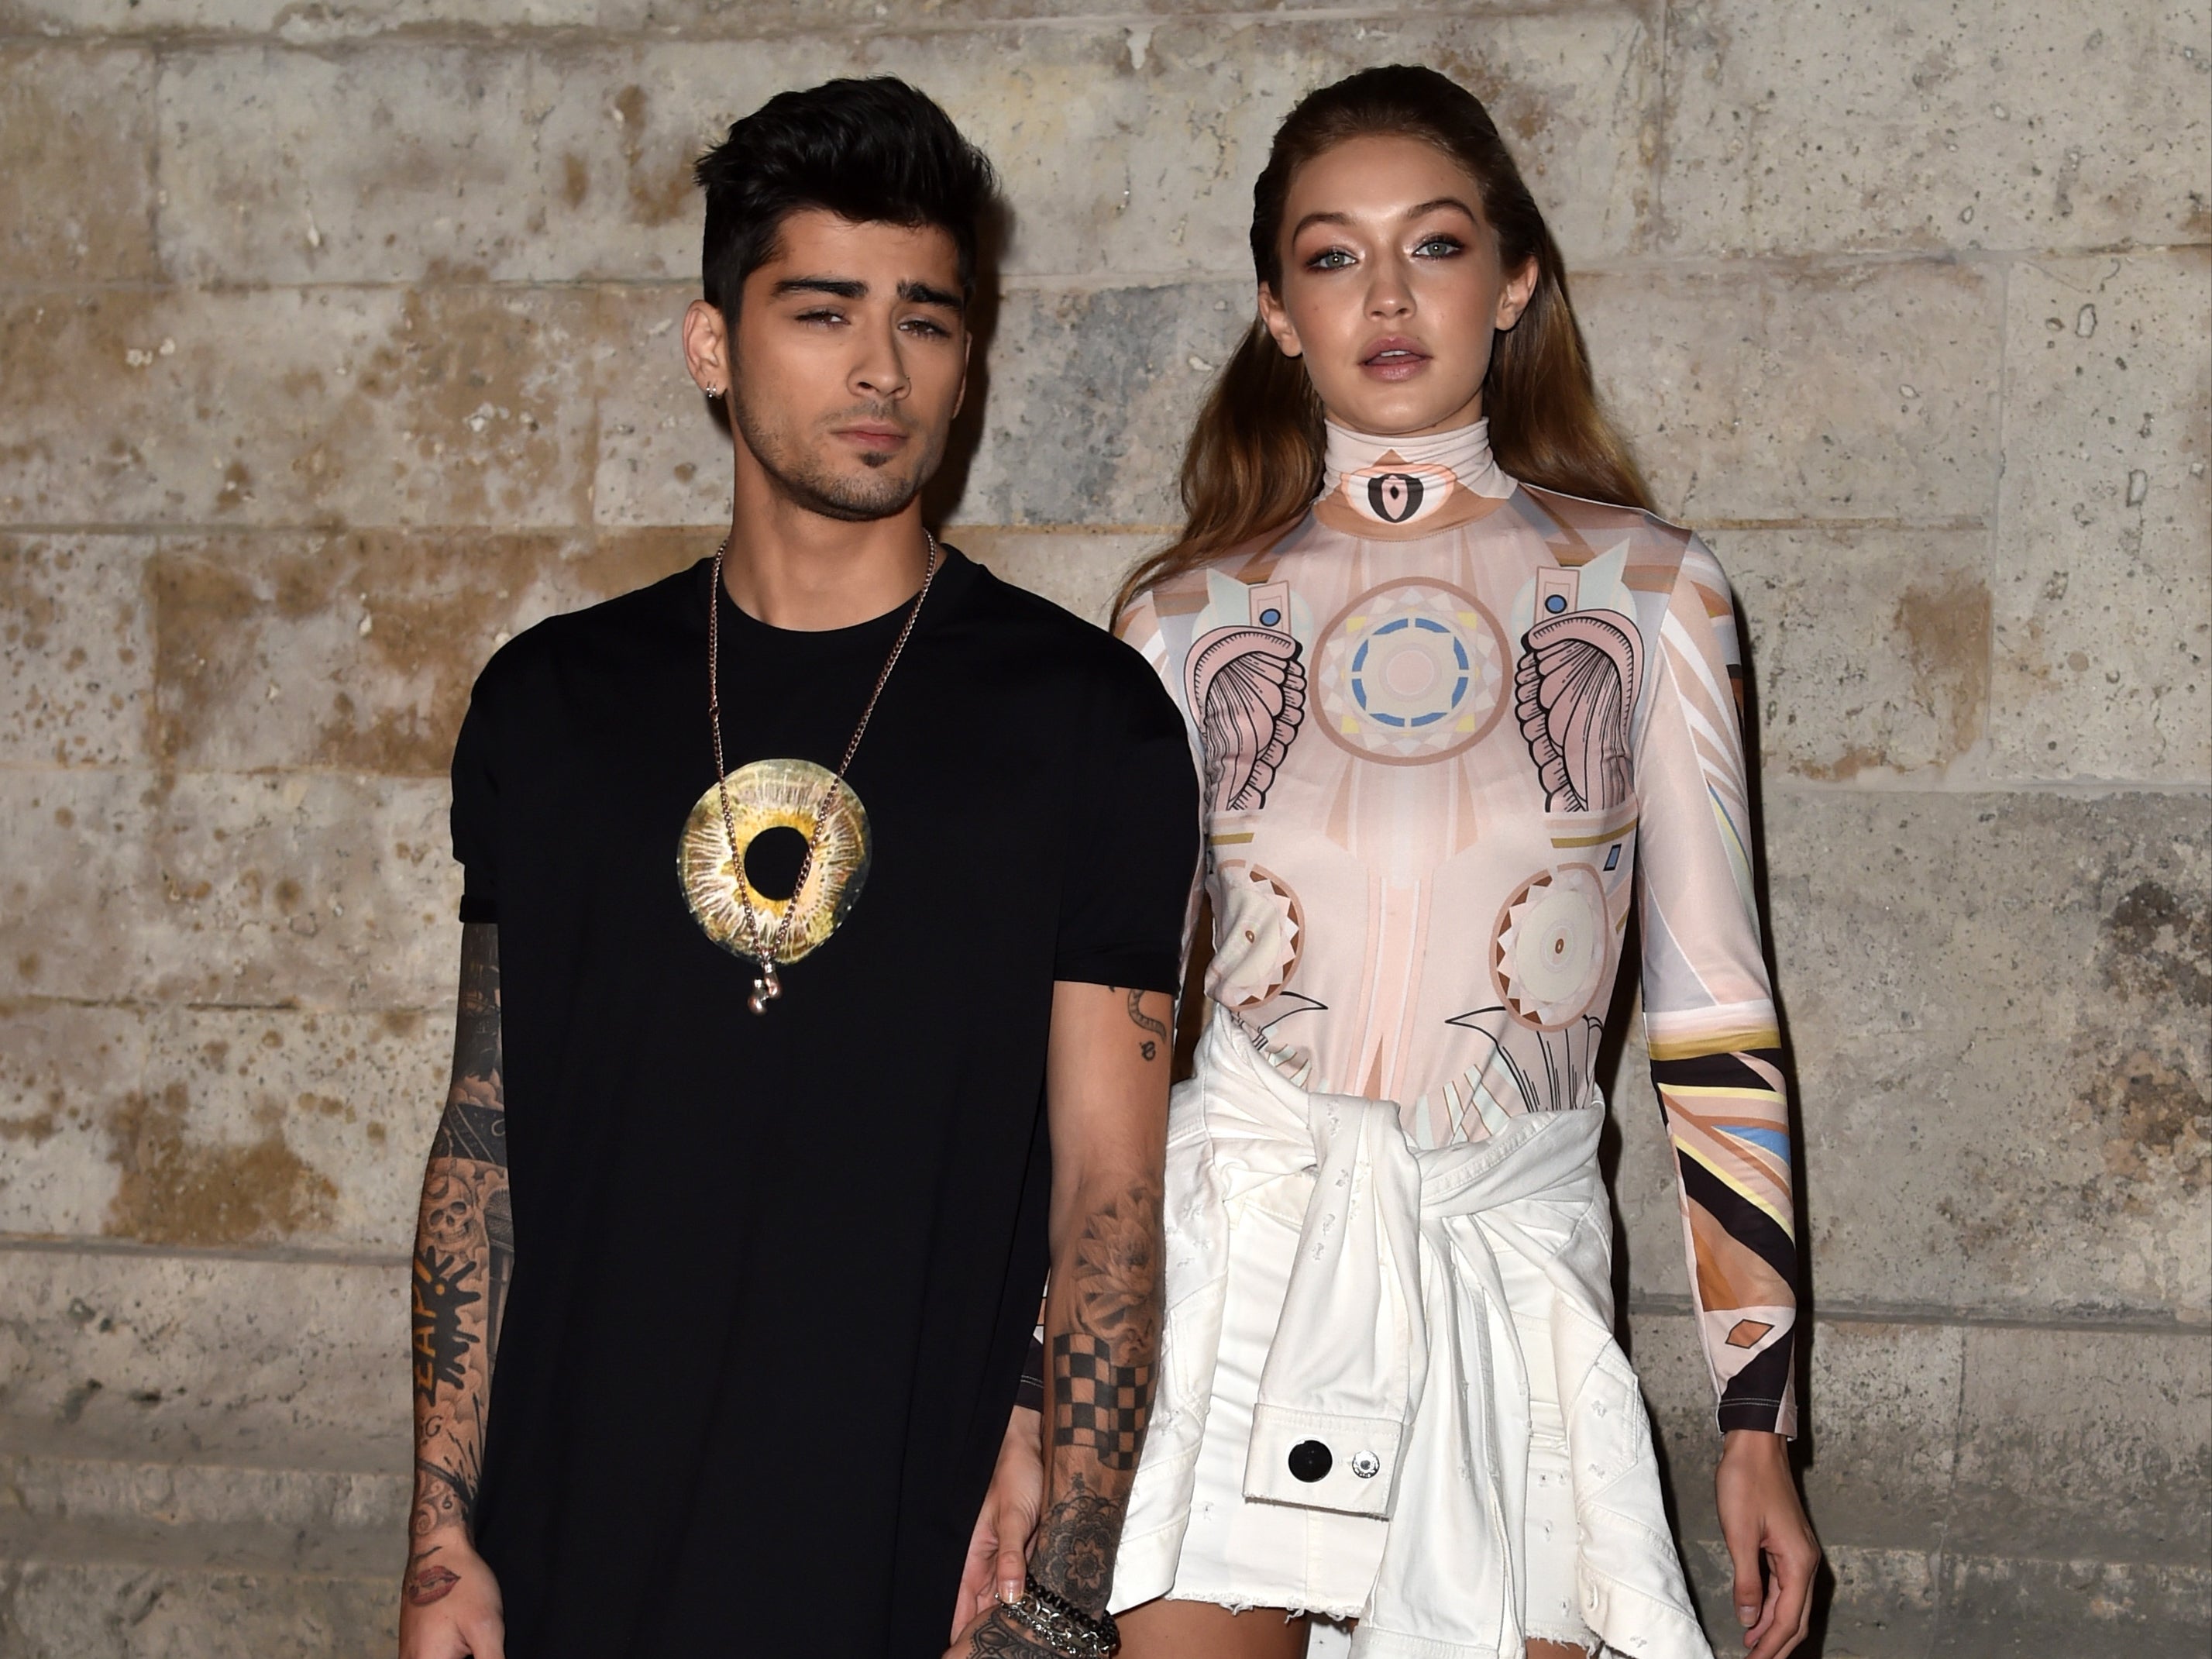 Zayn Malik and Gigi Hadid were once thought of as a Muslim power couple